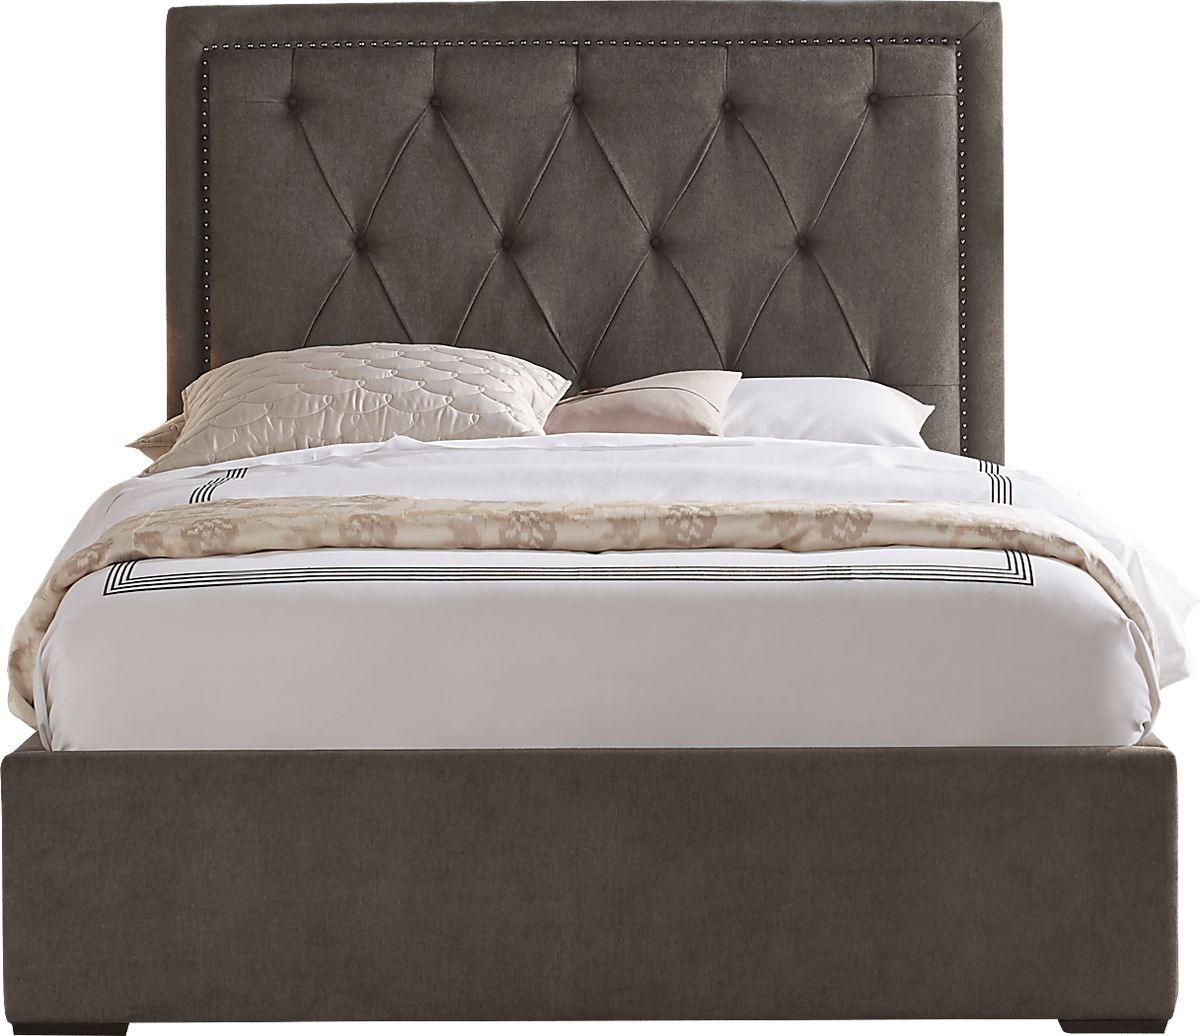 Elridge Graphite Black 3 Pc Queen Upholstered Bed | Rooms to Go